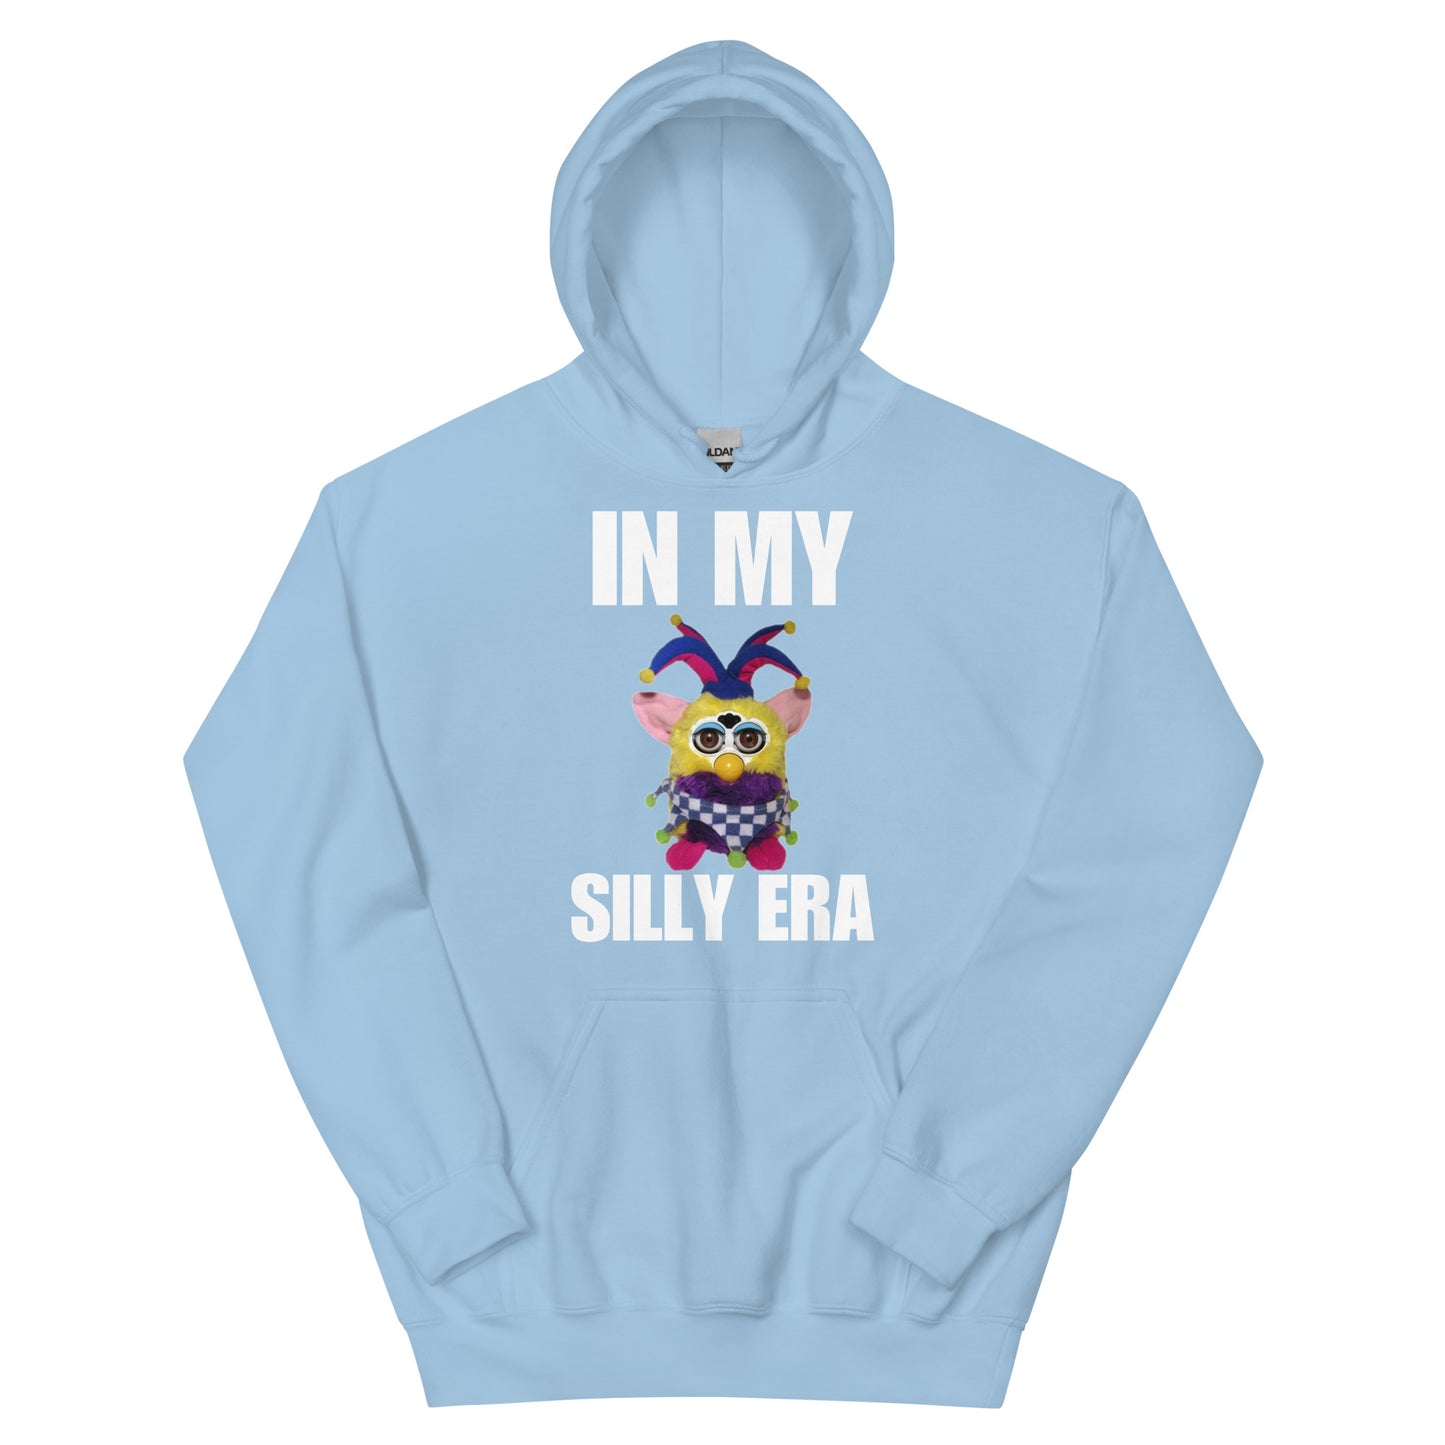 In my Silly Era Hoodie